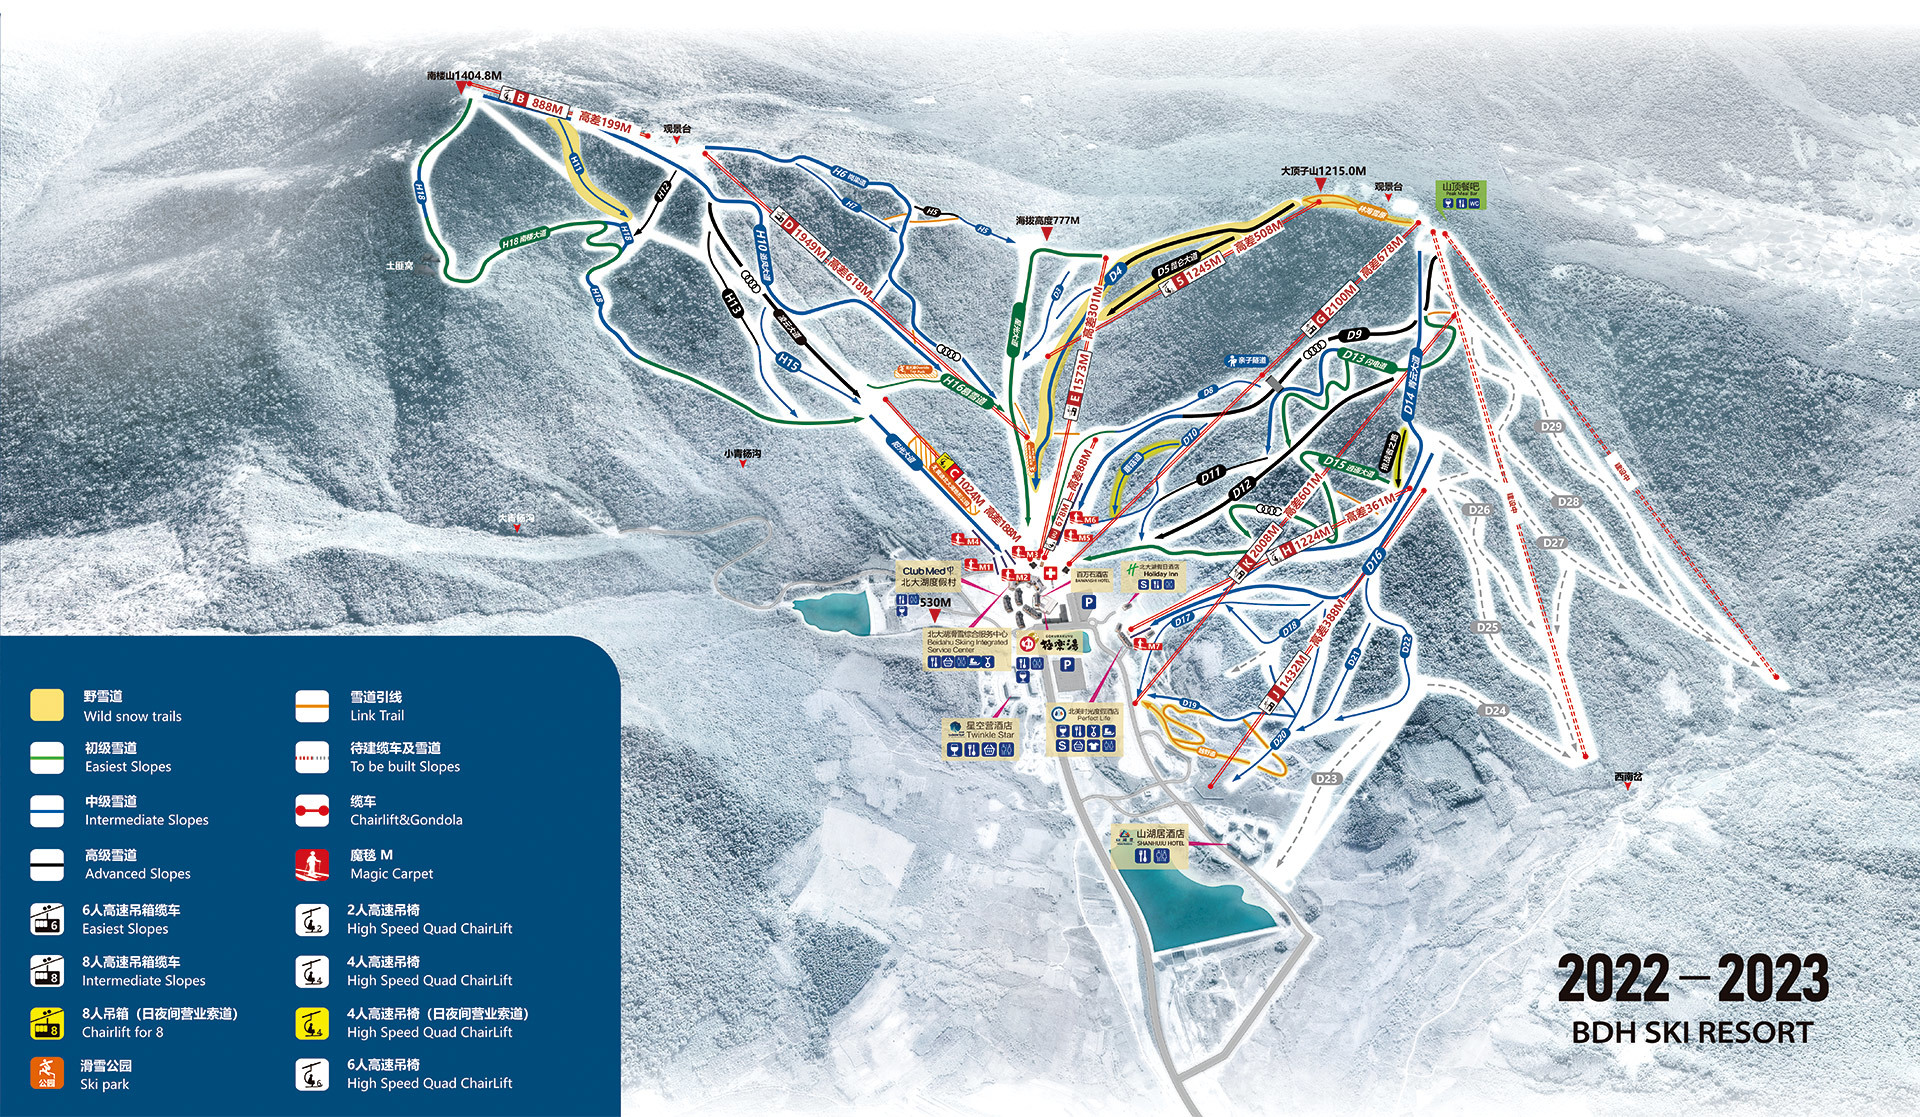 Night open every day | January 8 snow road opening plan